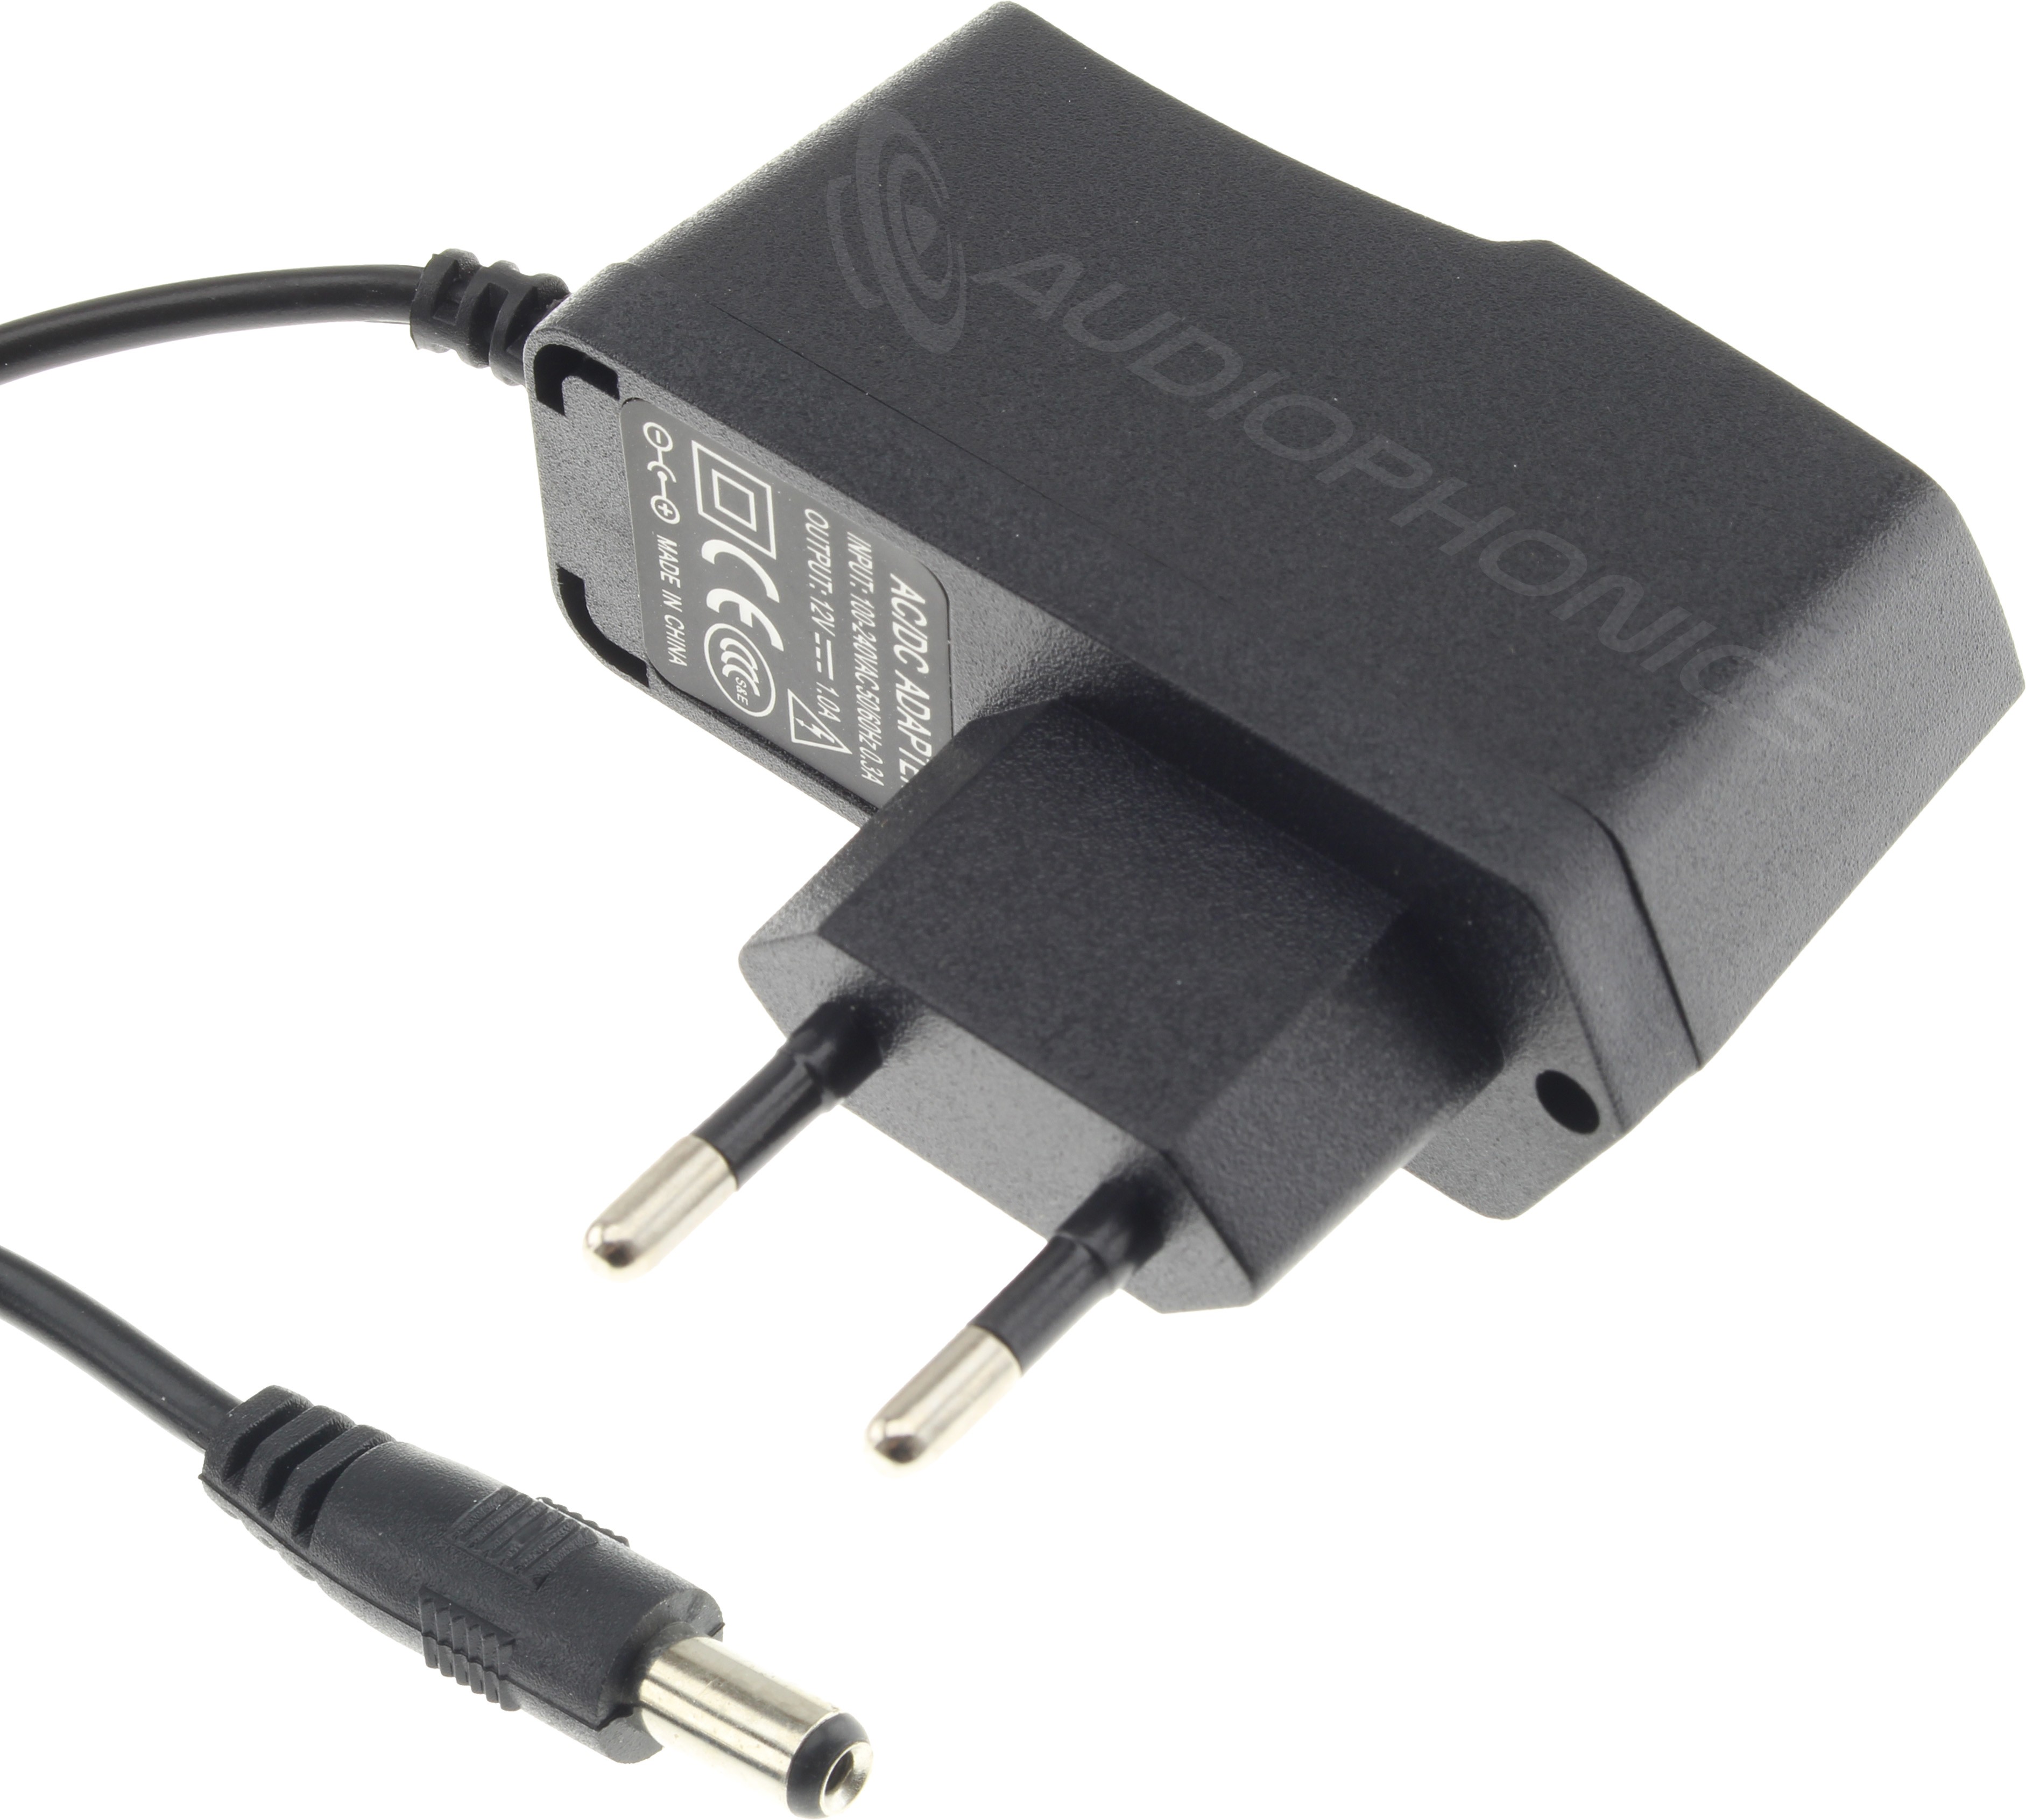 AC/DC Switching Power Adapter 100-240V AC to 12V 1A DC